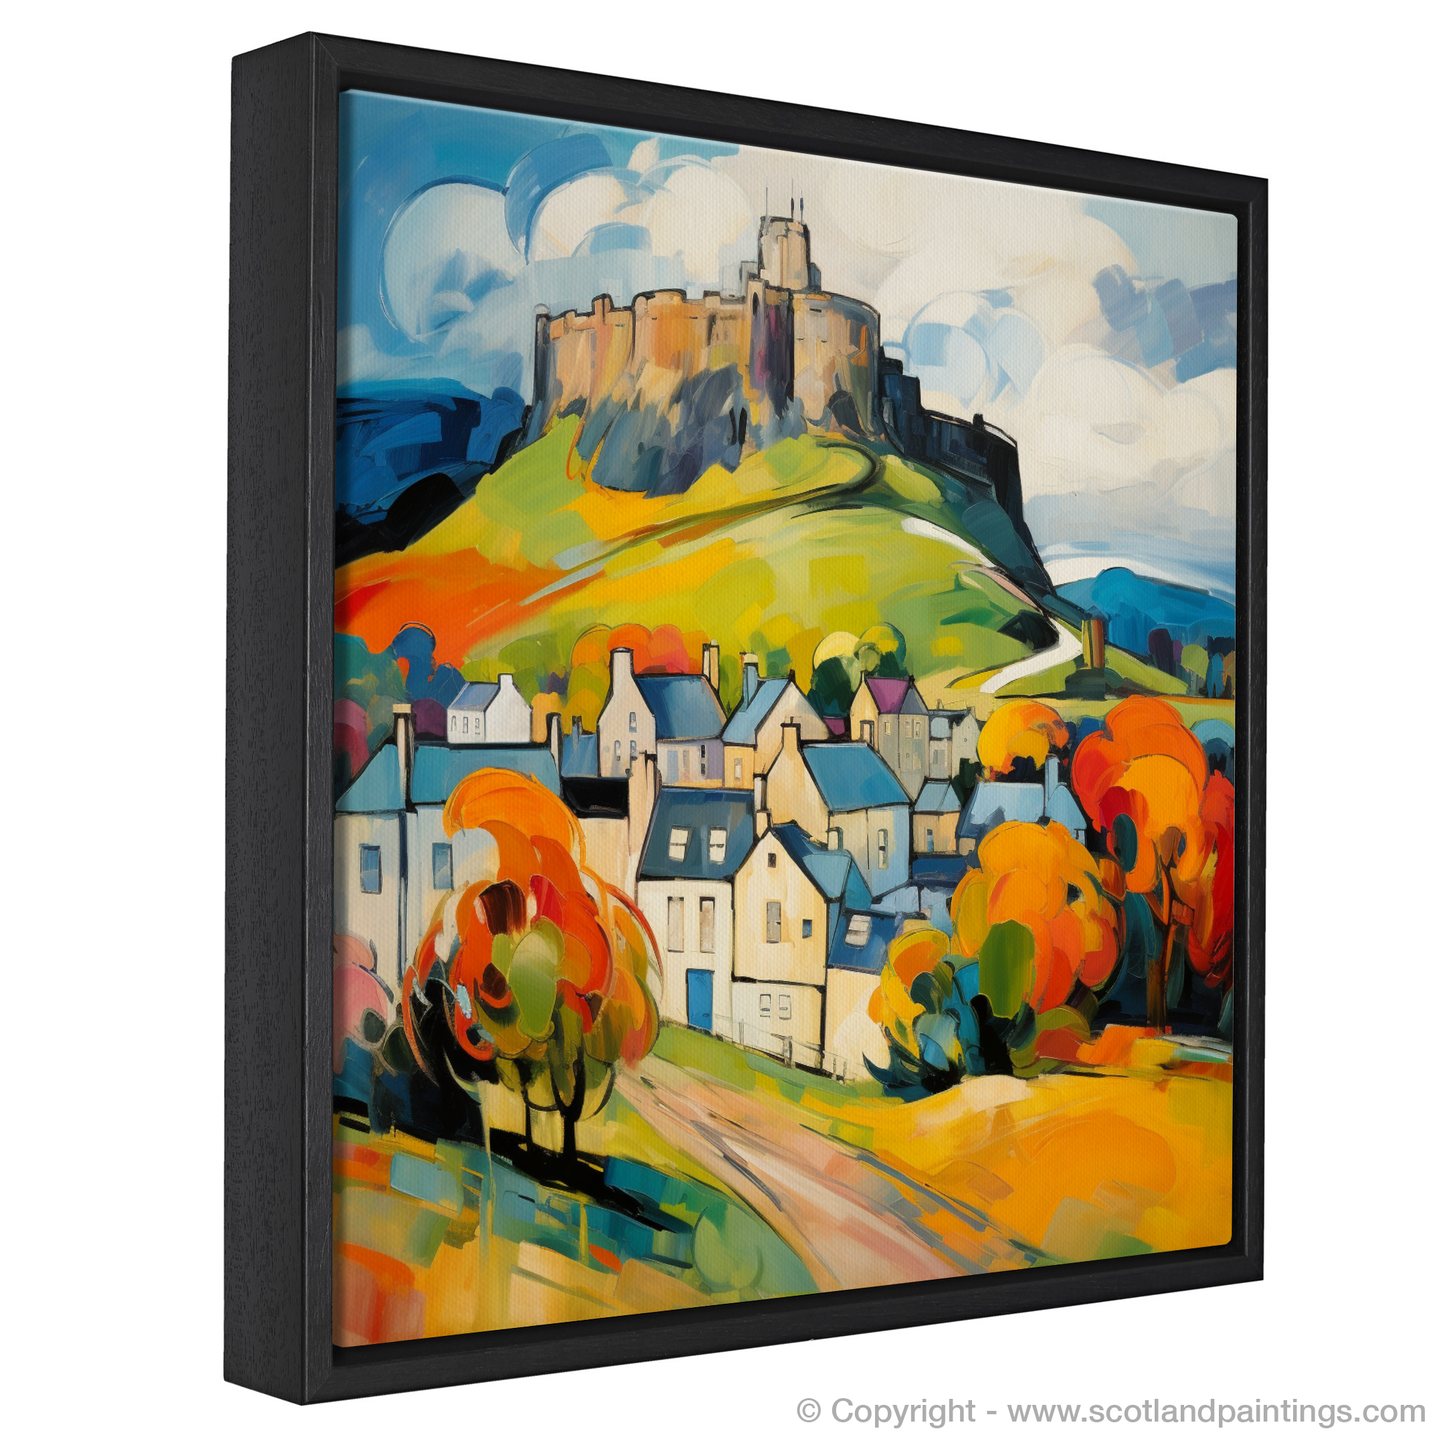 Vibrant Stirling: A Fauvist Ode to Scotland's Heart